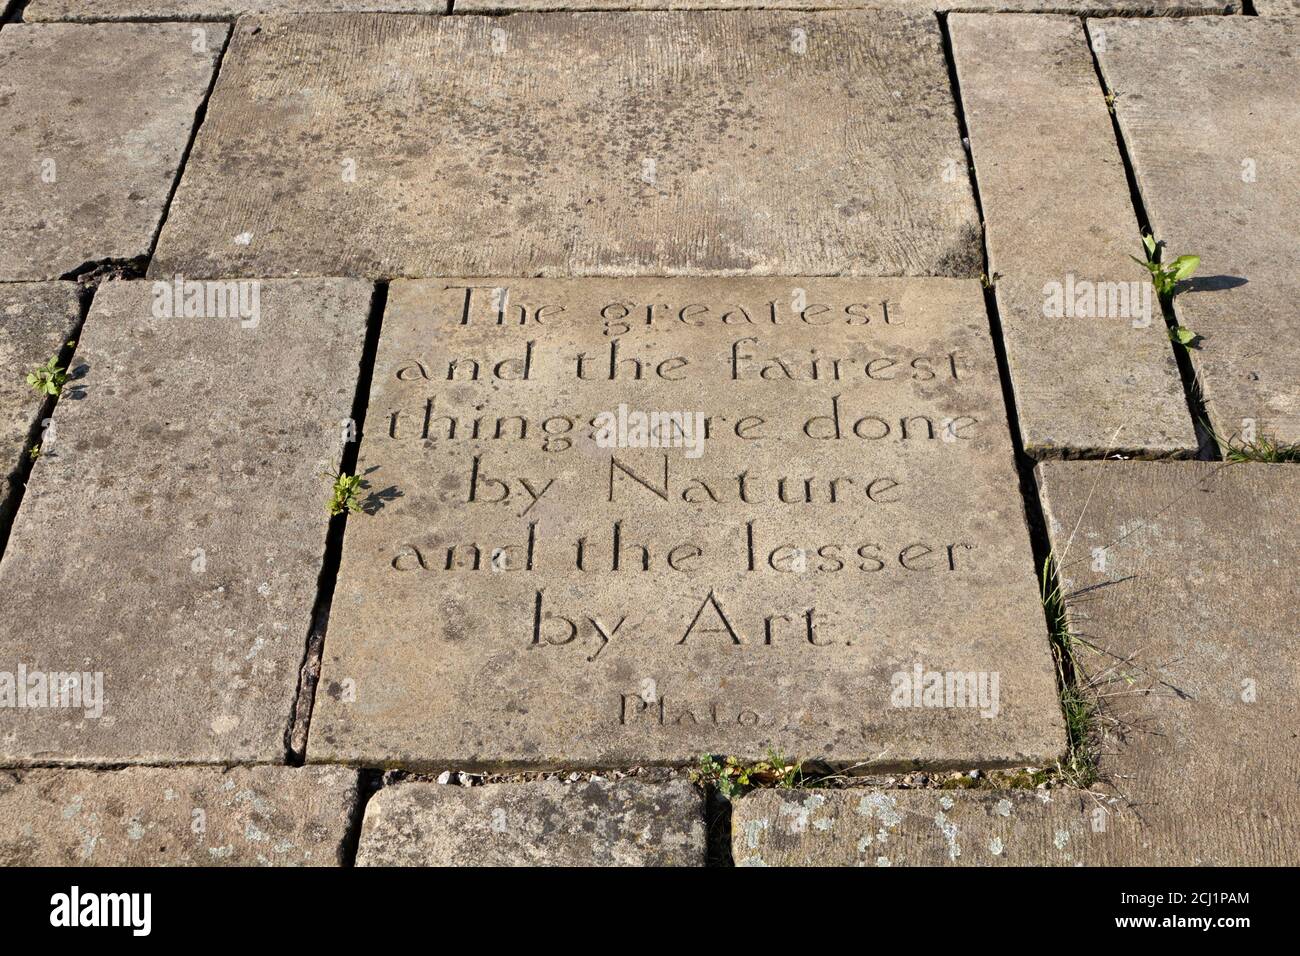 The greatest and fairest things are done by nature and the lesser by art, quote by Plato, on paving slab, in a garden of remembrance Stock Photo